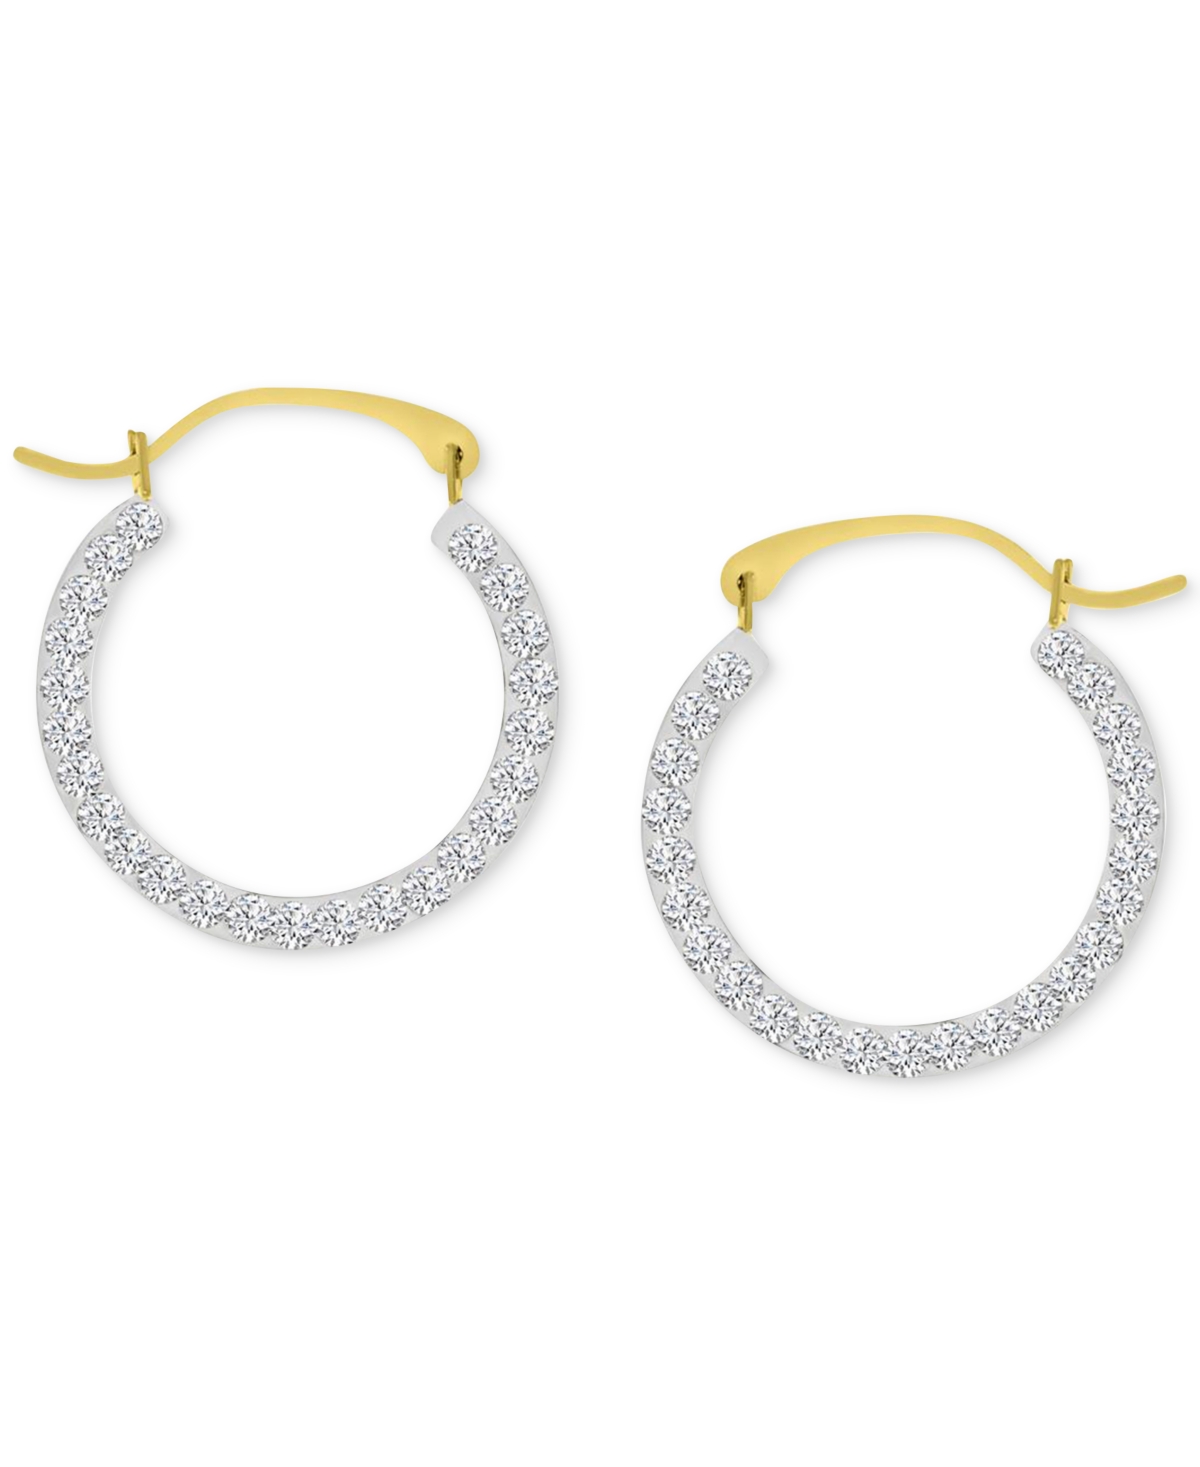 Crystal Pave Small Round Hoop Earrings in 10k Gold, 0.75" - Gold